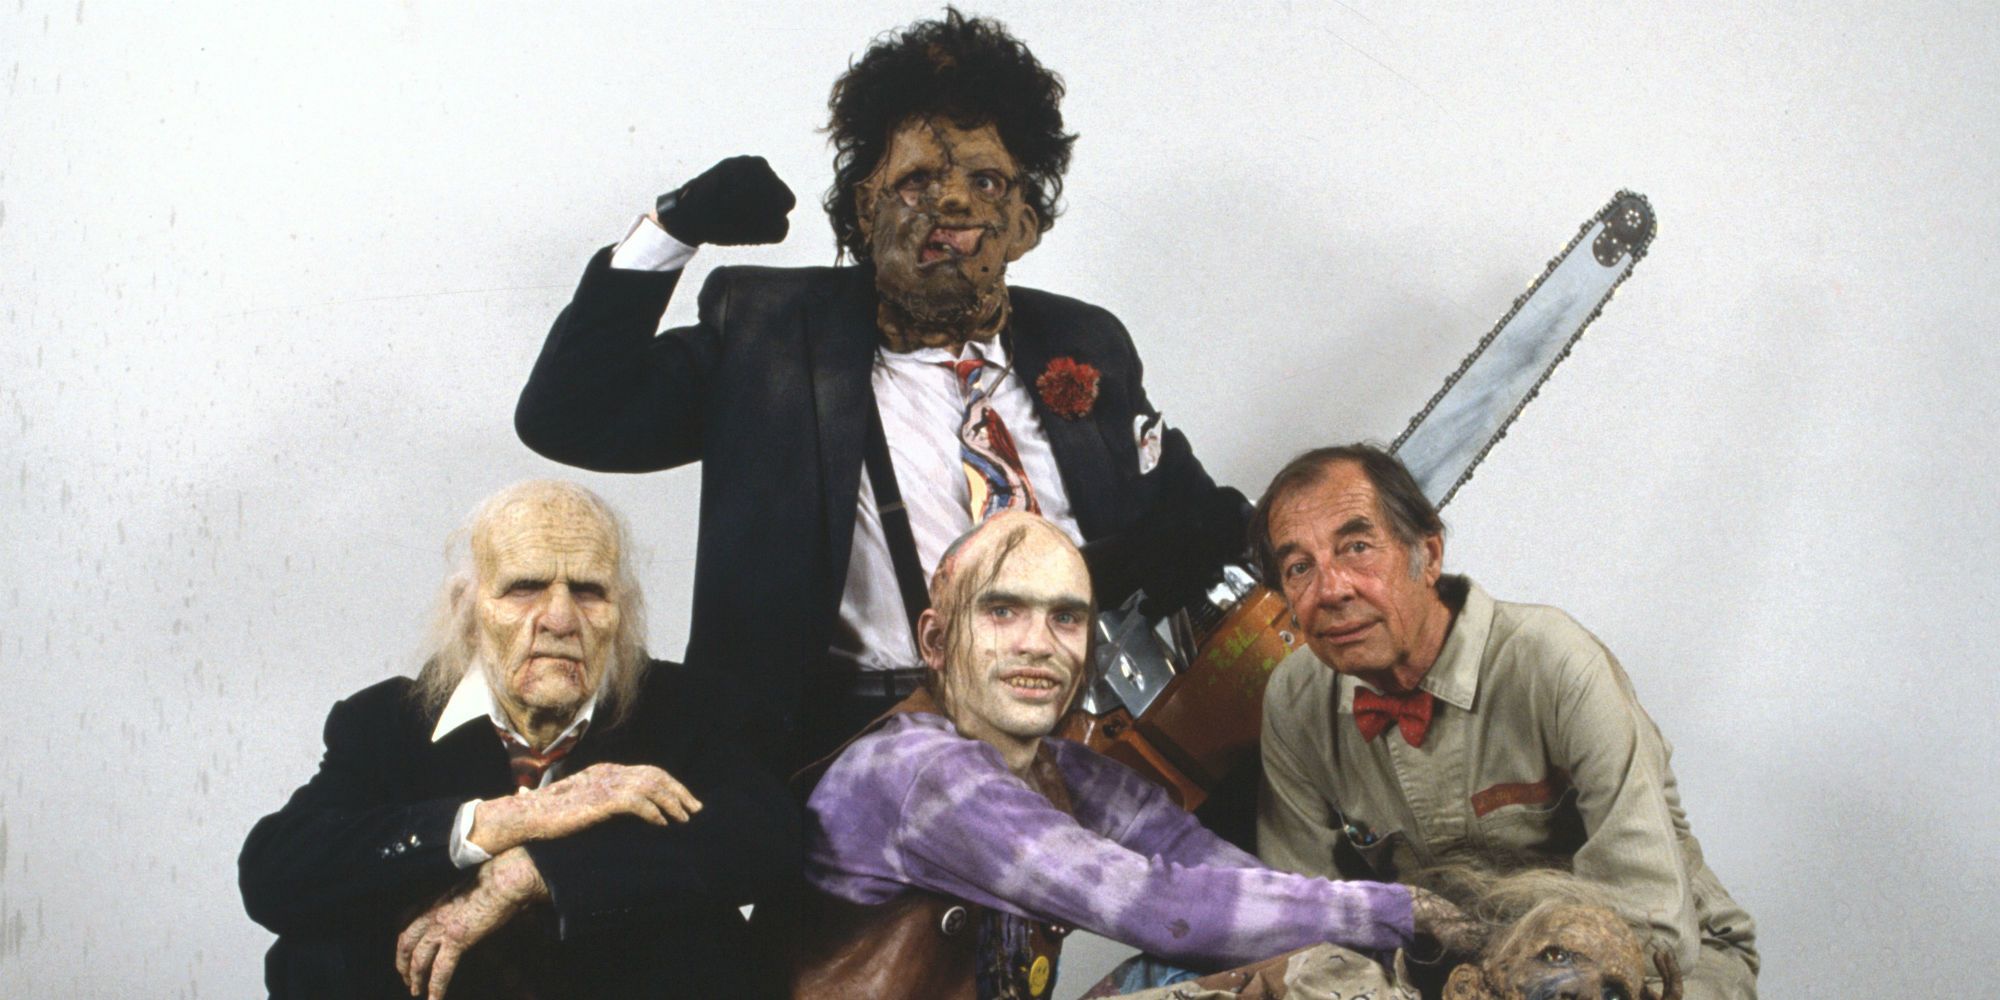 Texas Chainsaw Massacre 2 - Leatherface and Family